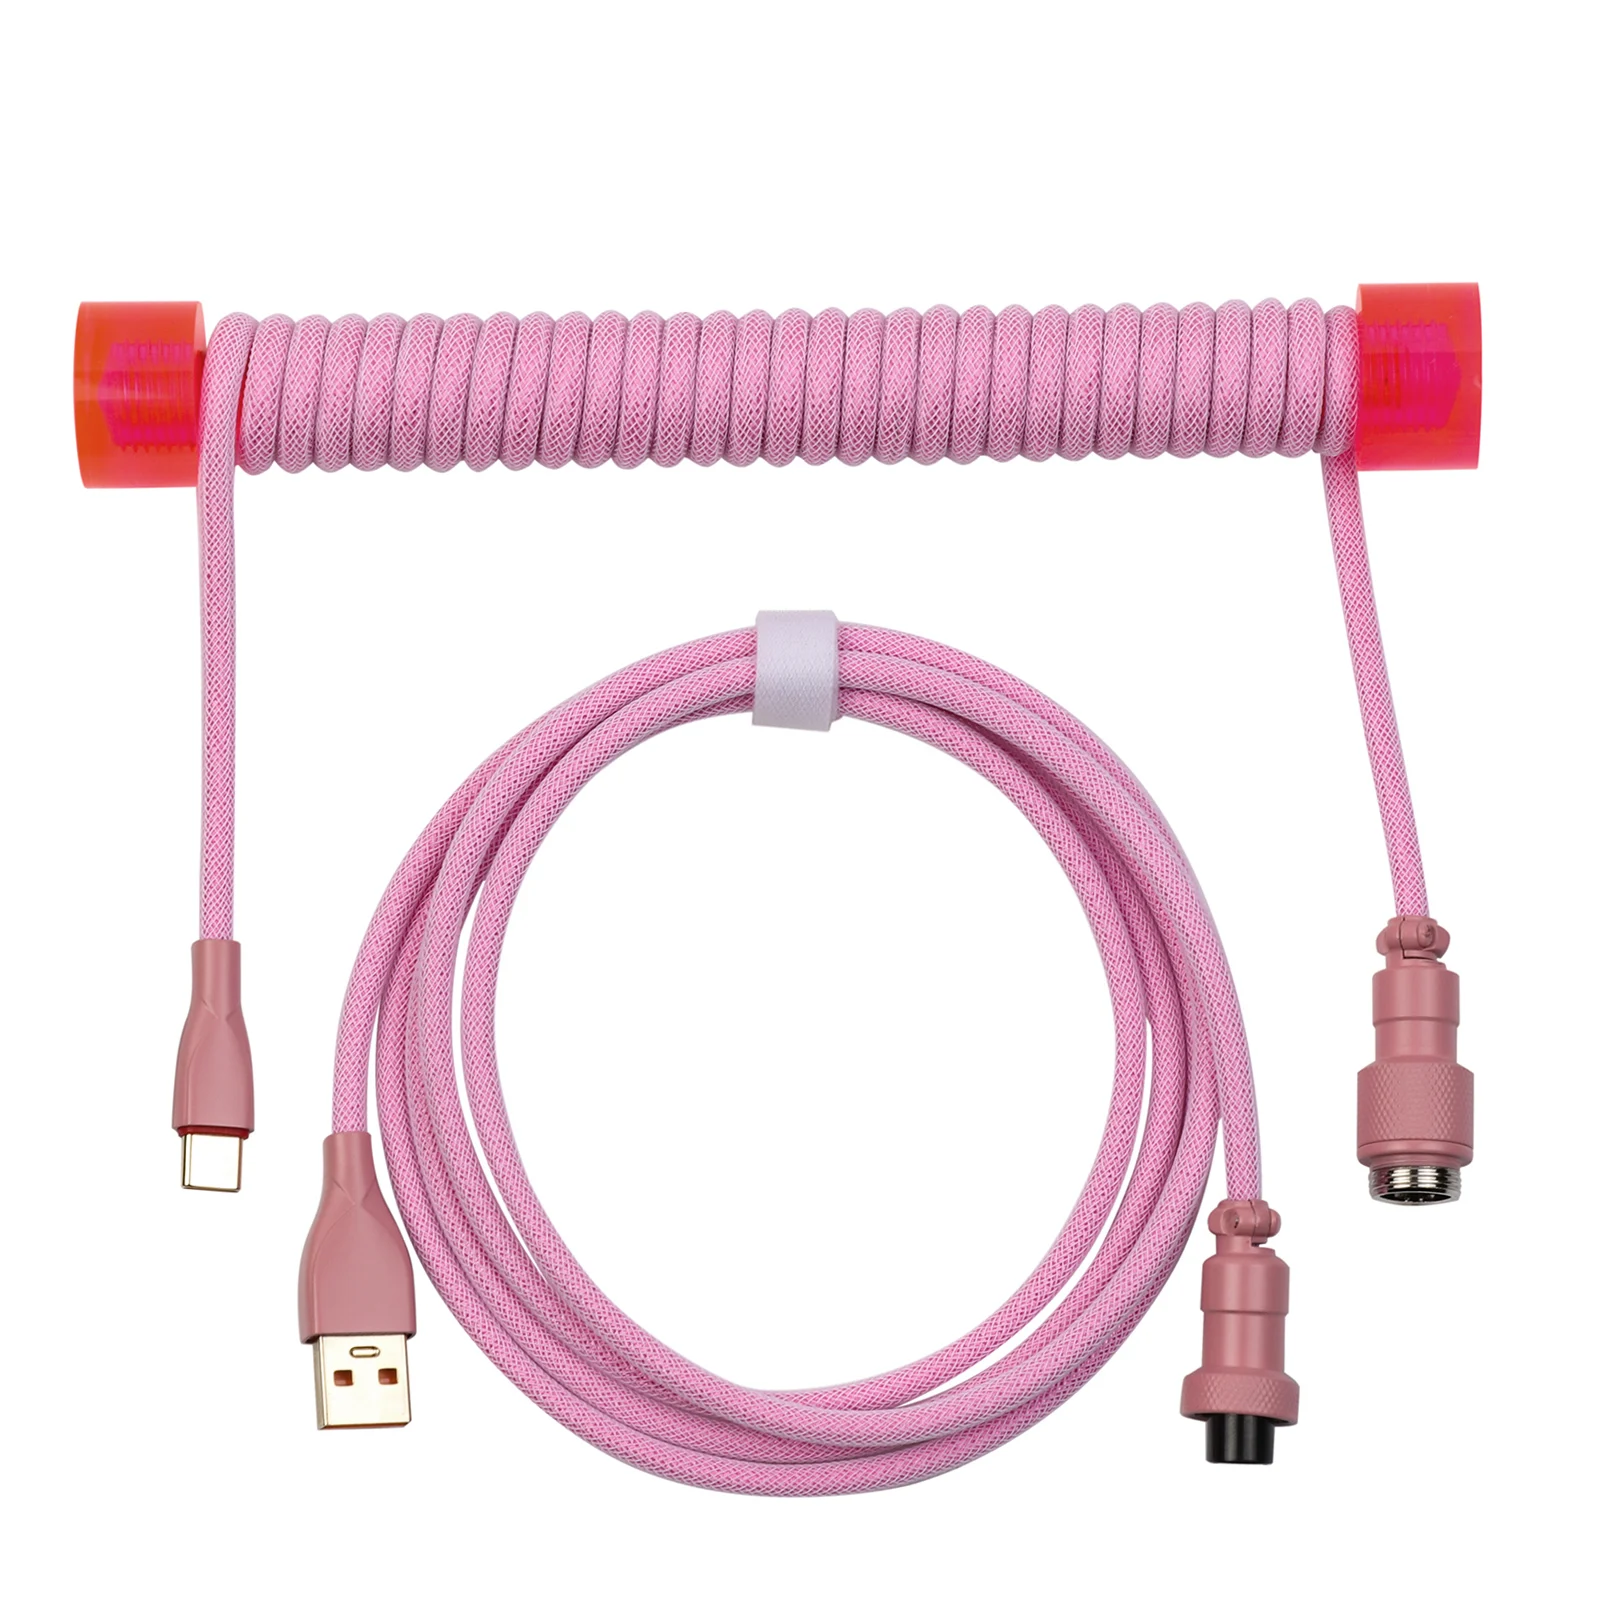 EPOMAKER Mix SE Coiled USB C Cable 1.5m Double Sleeved Cable for Mechanical Keyboard with Detachable 4-Pin Aviator Connector